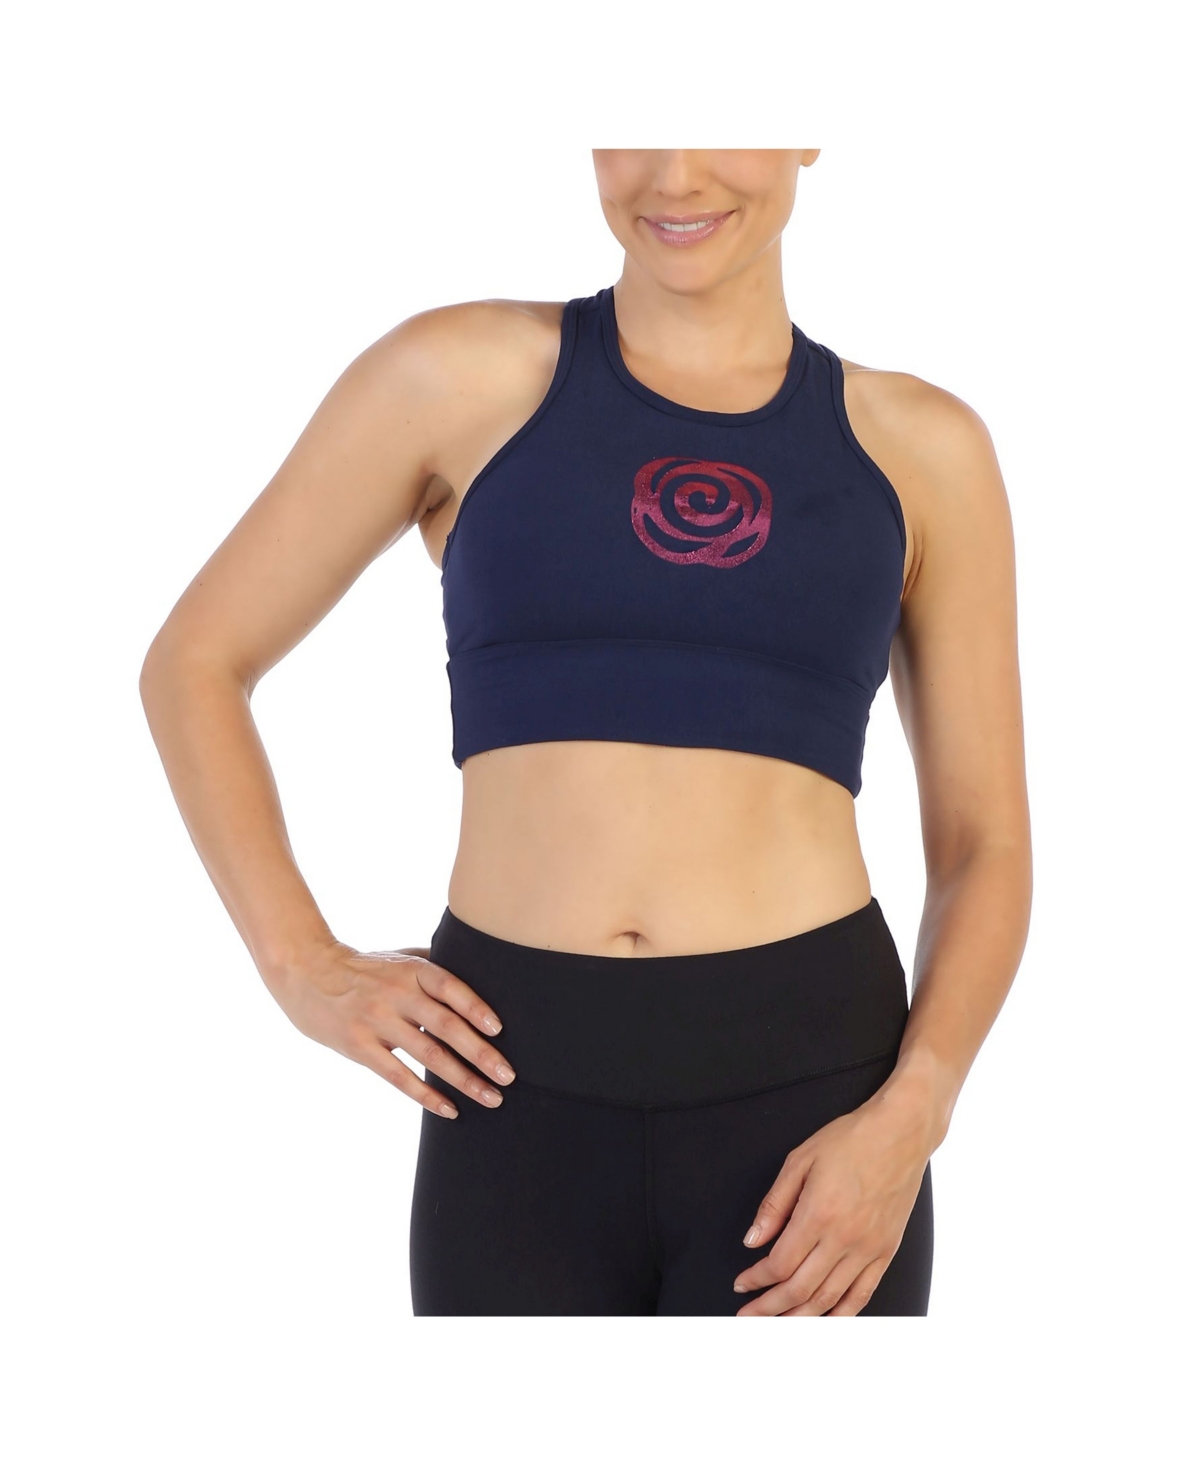 American Fitness Couture Racerback Sports Bra